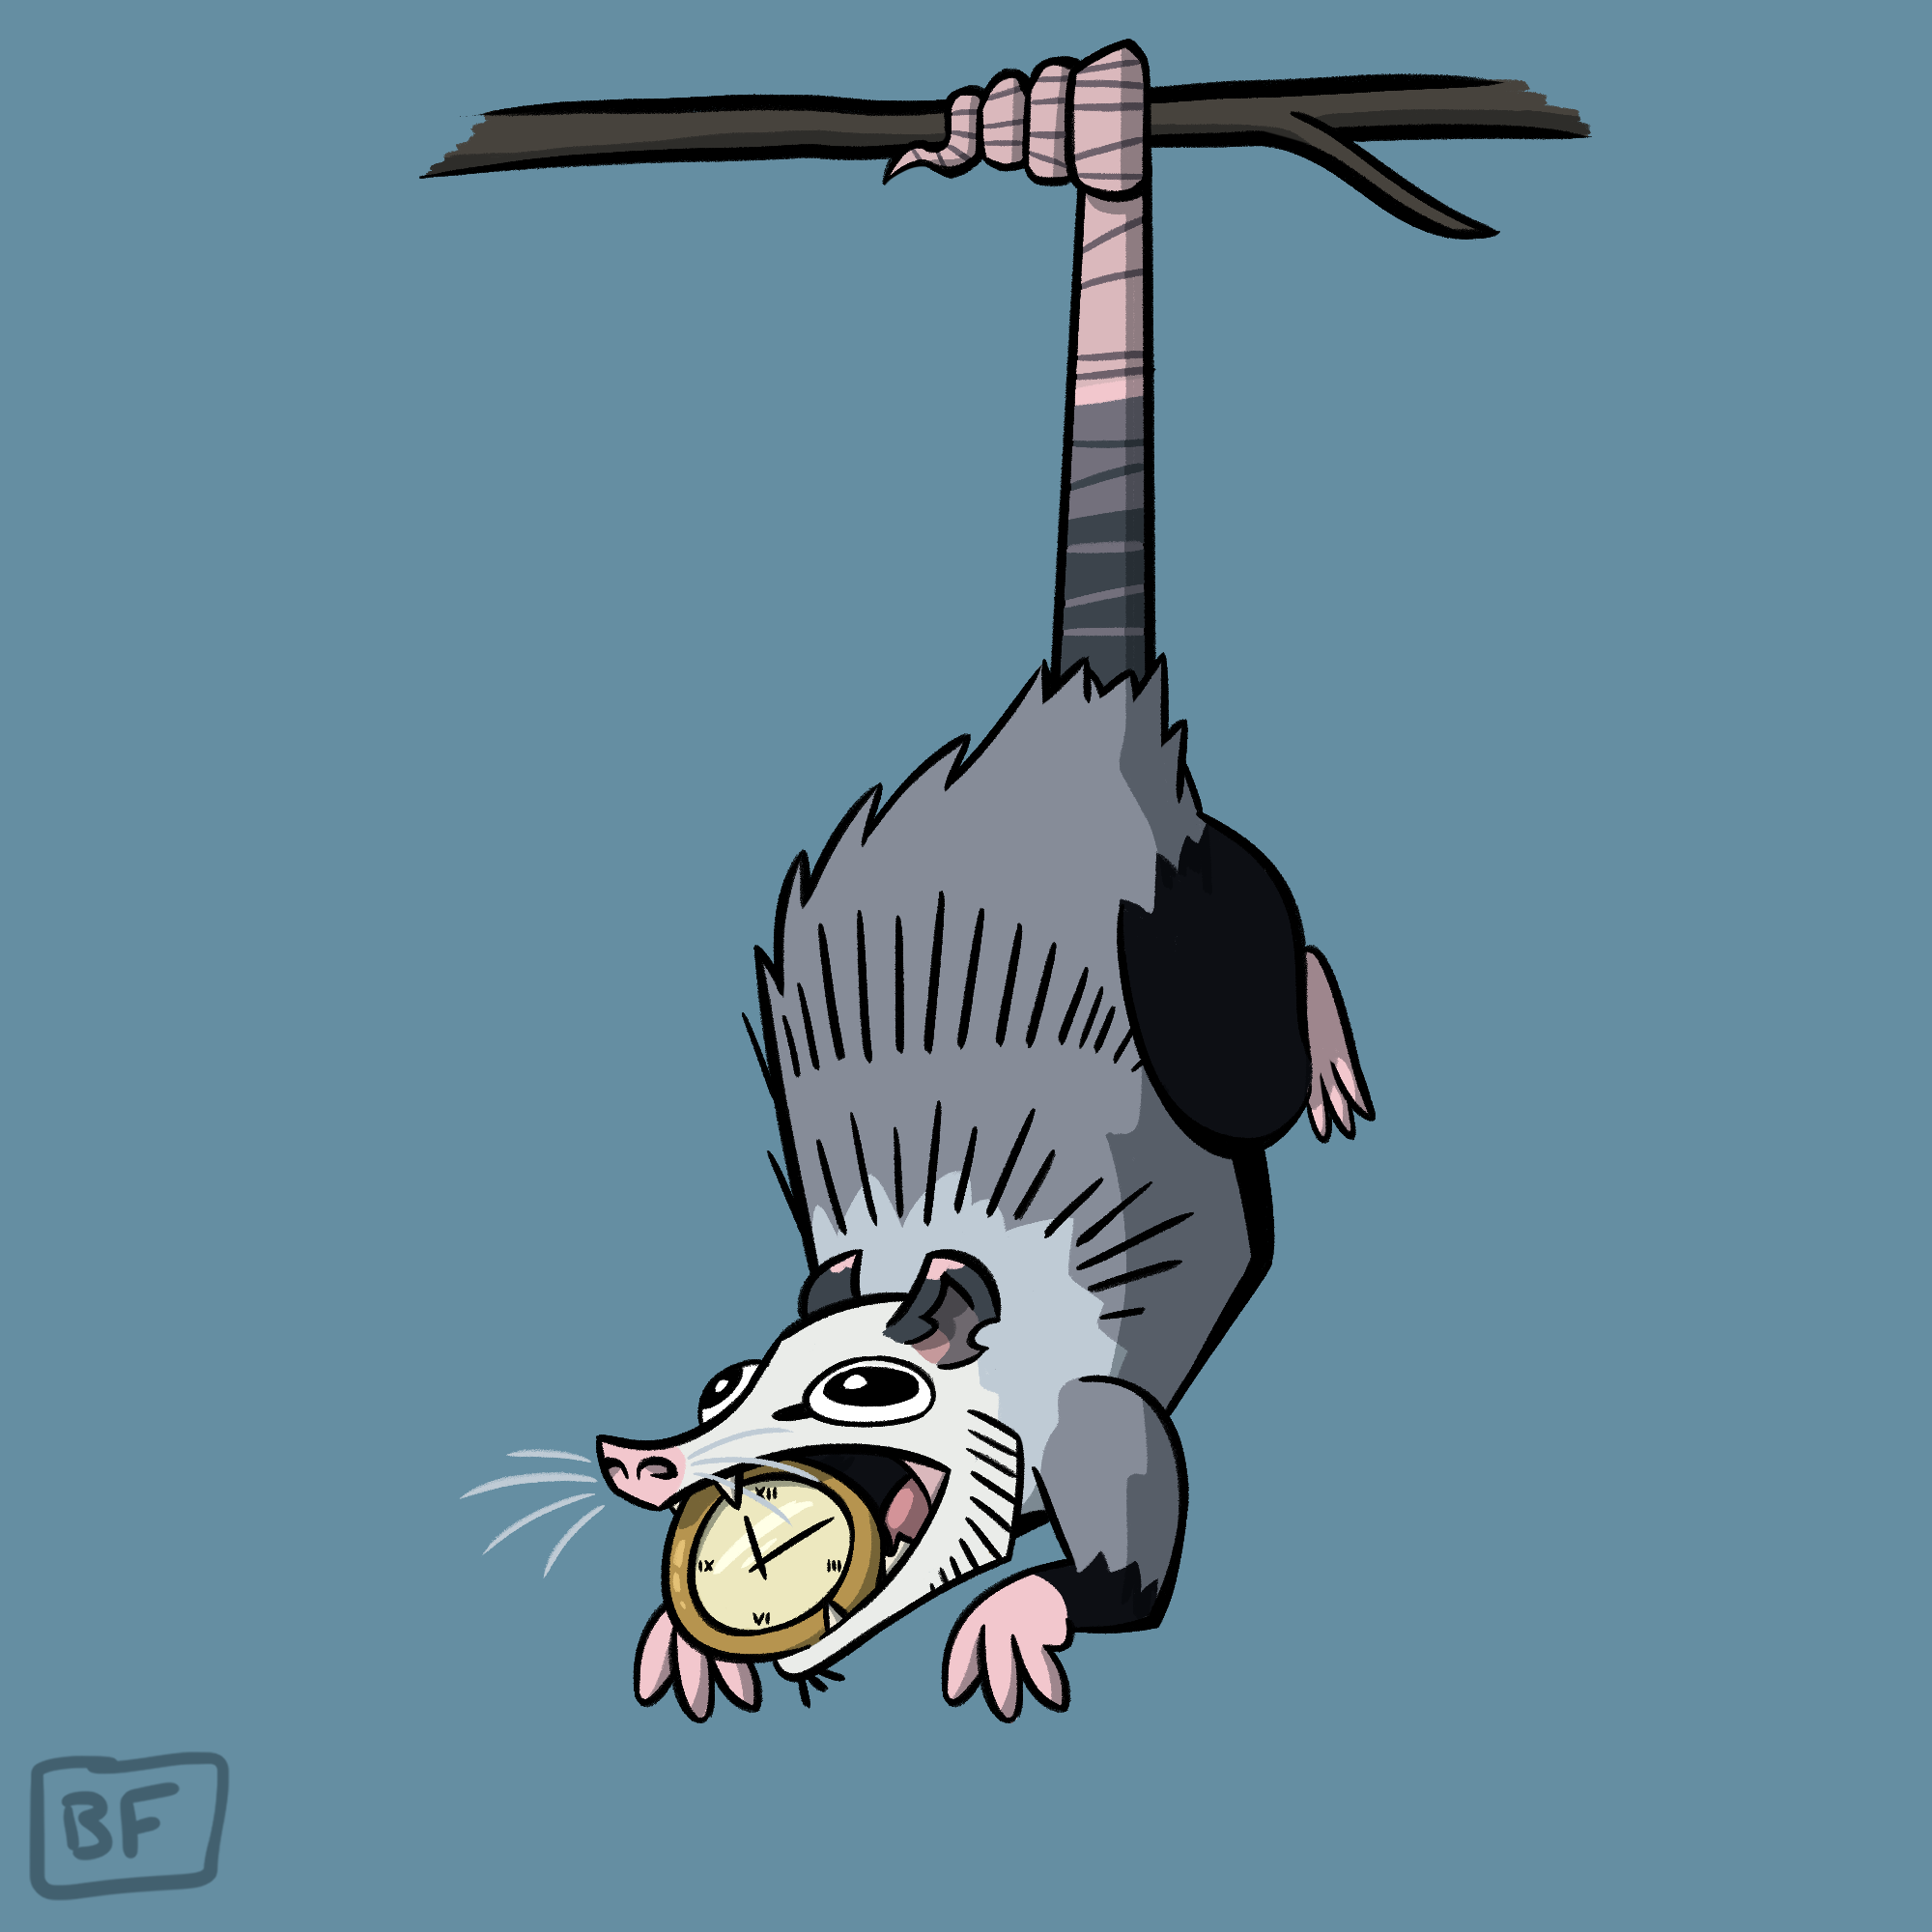 Day 8. Opossum with a Clock in its Mouth